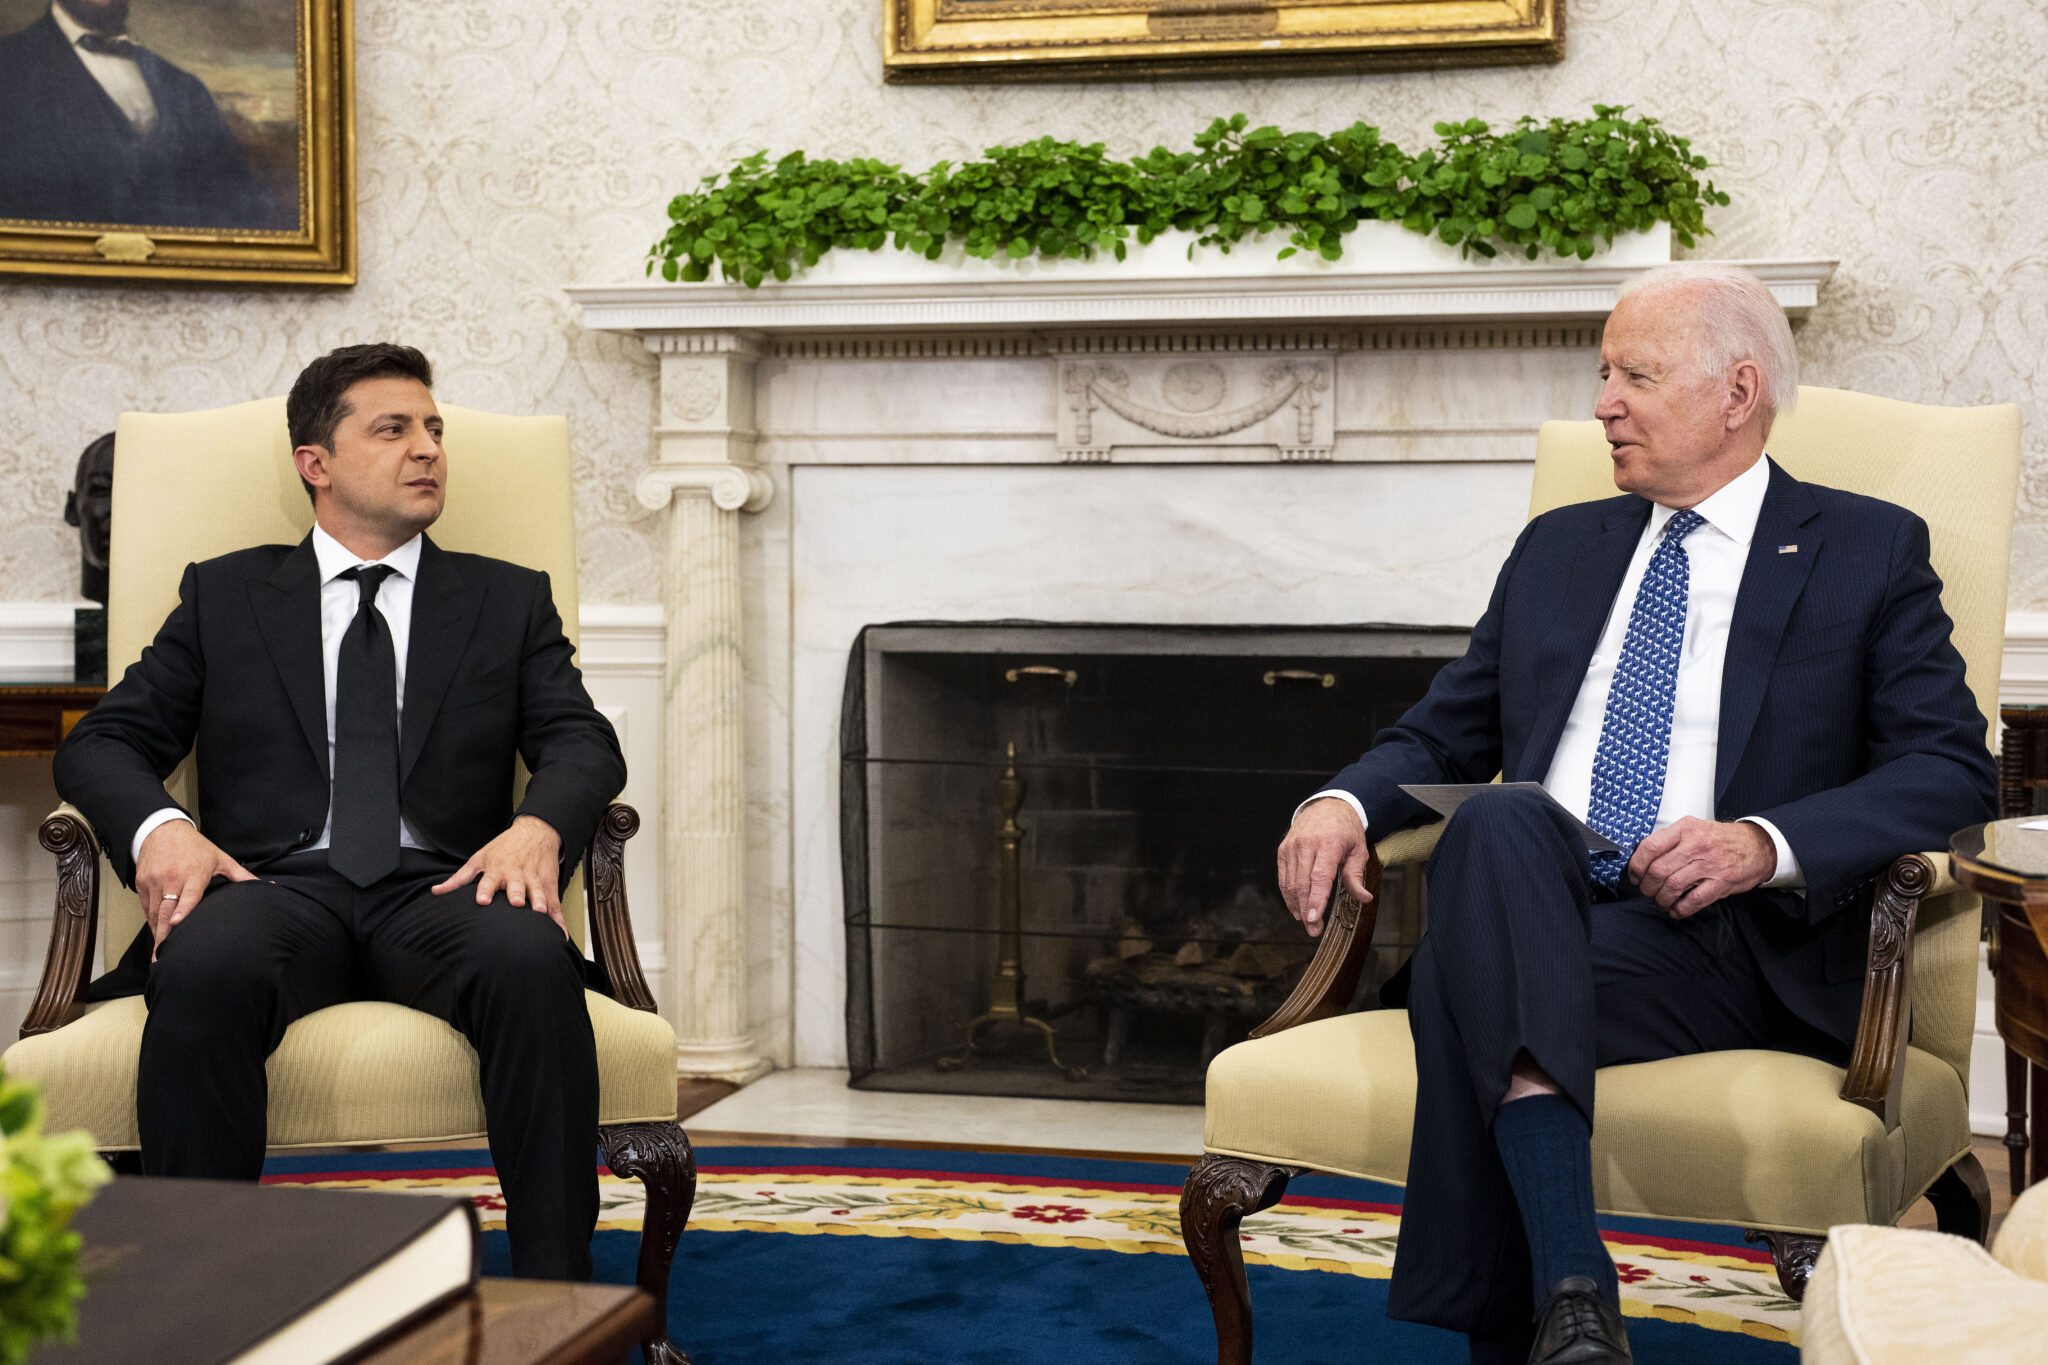 BREAKING WORLD WAR III NEWS: President Biden Got Angry With Ukraine President Zelenskyy Because he Asked For More Aid Just Days After Getting $1 Billion